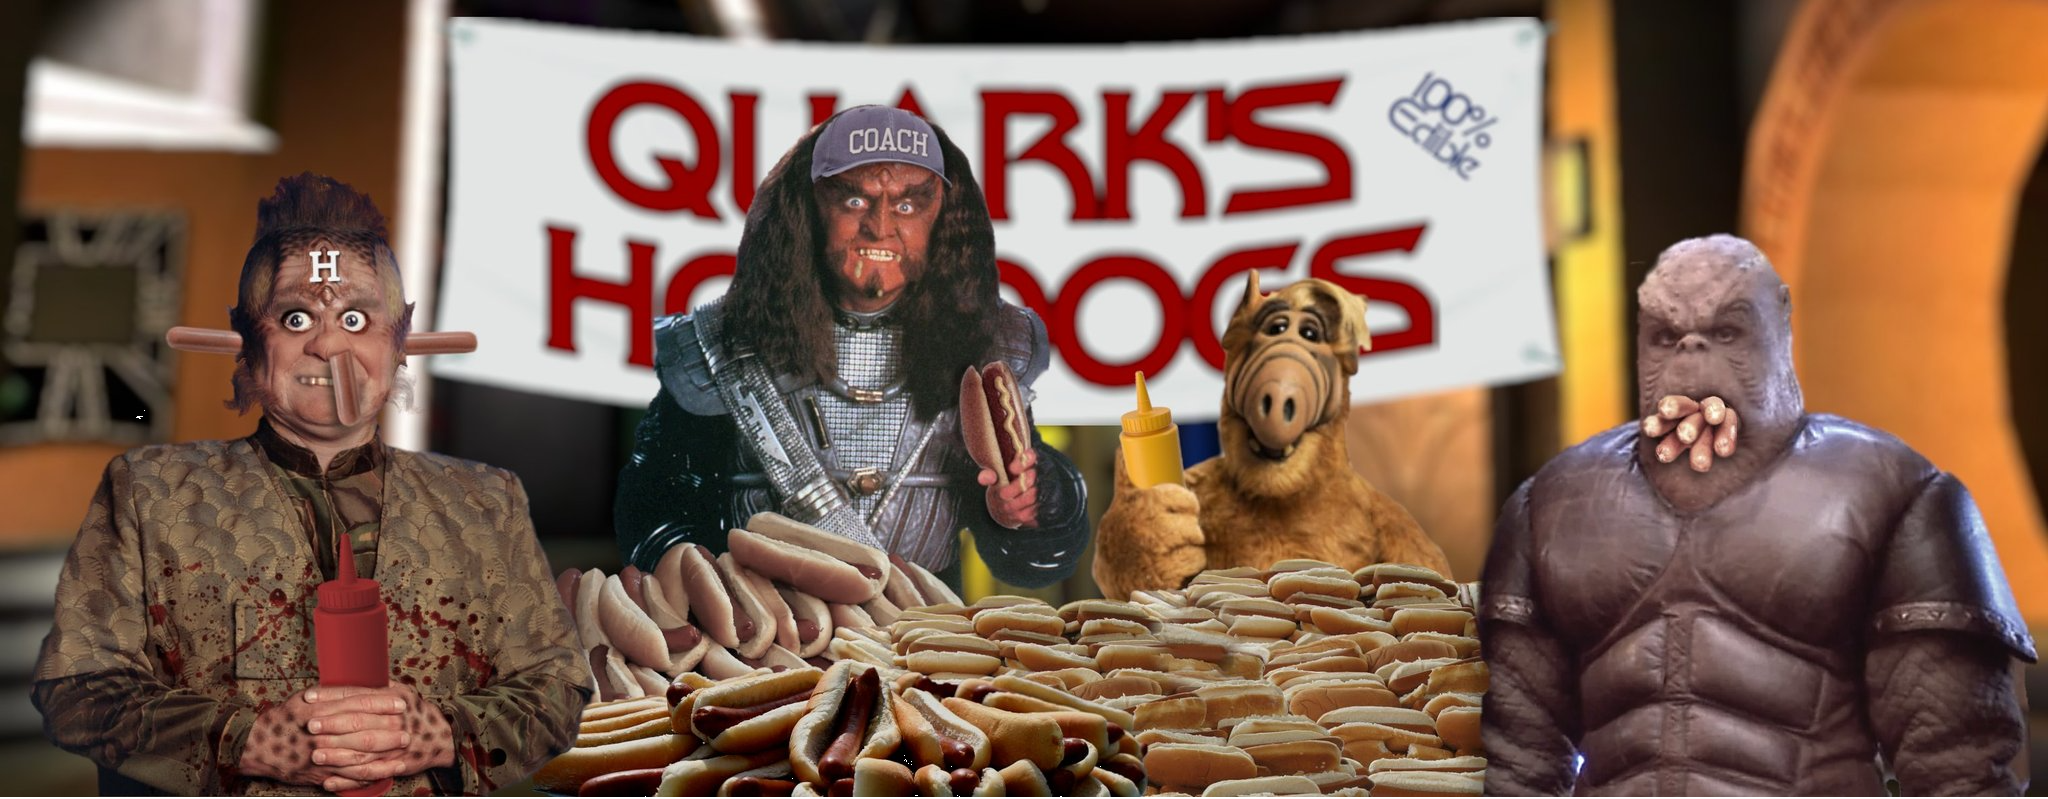 Coach Gowron Gowrix Morn Alf Hot Dog Eating Contest Blank Meme Template